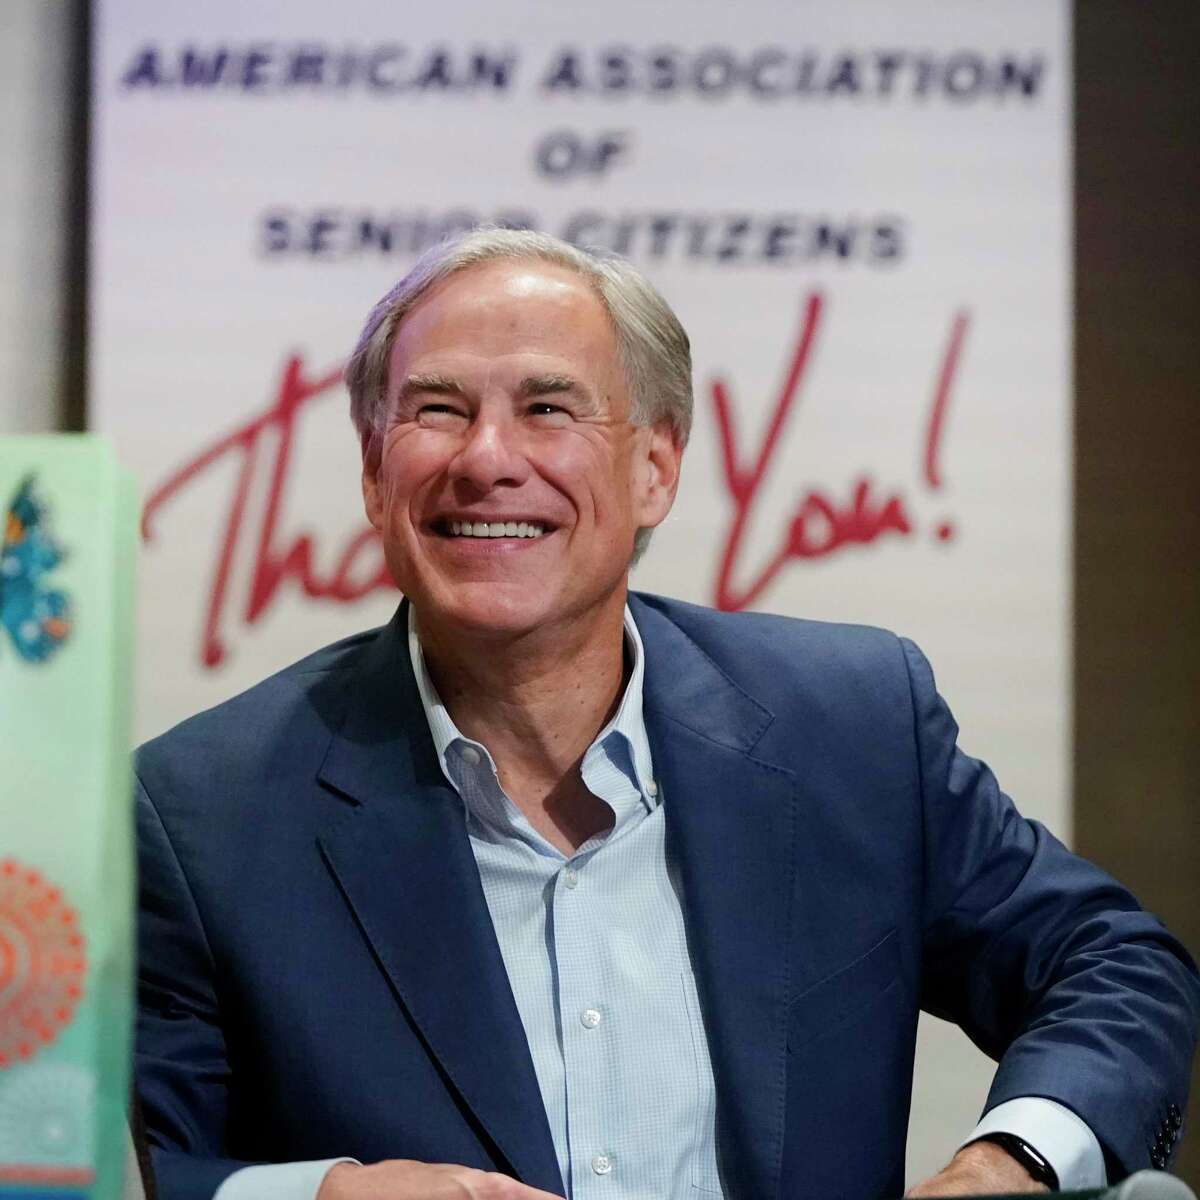 Texas Governor Greg Abbott is pictured onstage at the Republican Club at Heritage Ranch monthly meeting in Fairview, Texas. CREDIT: Louis DeLuca for The Houston Chronicle